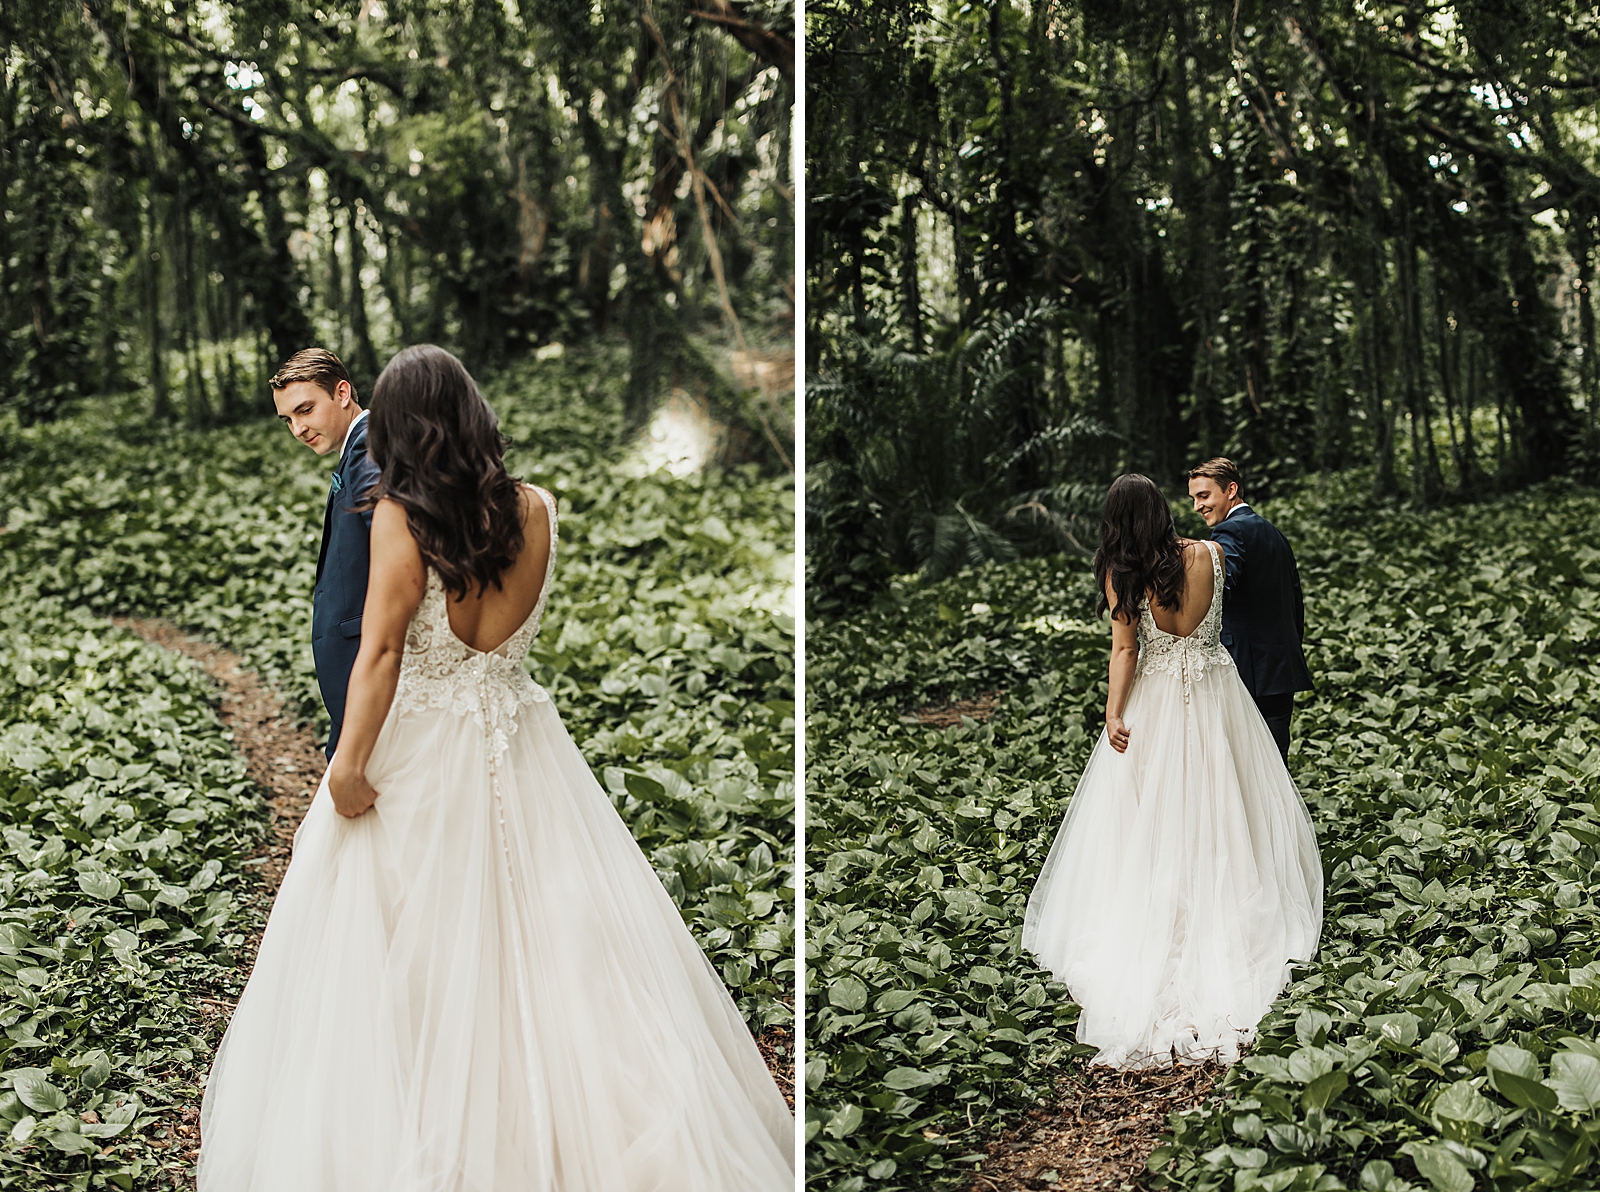 Groom holding Bride's hand and leading her through green bushes